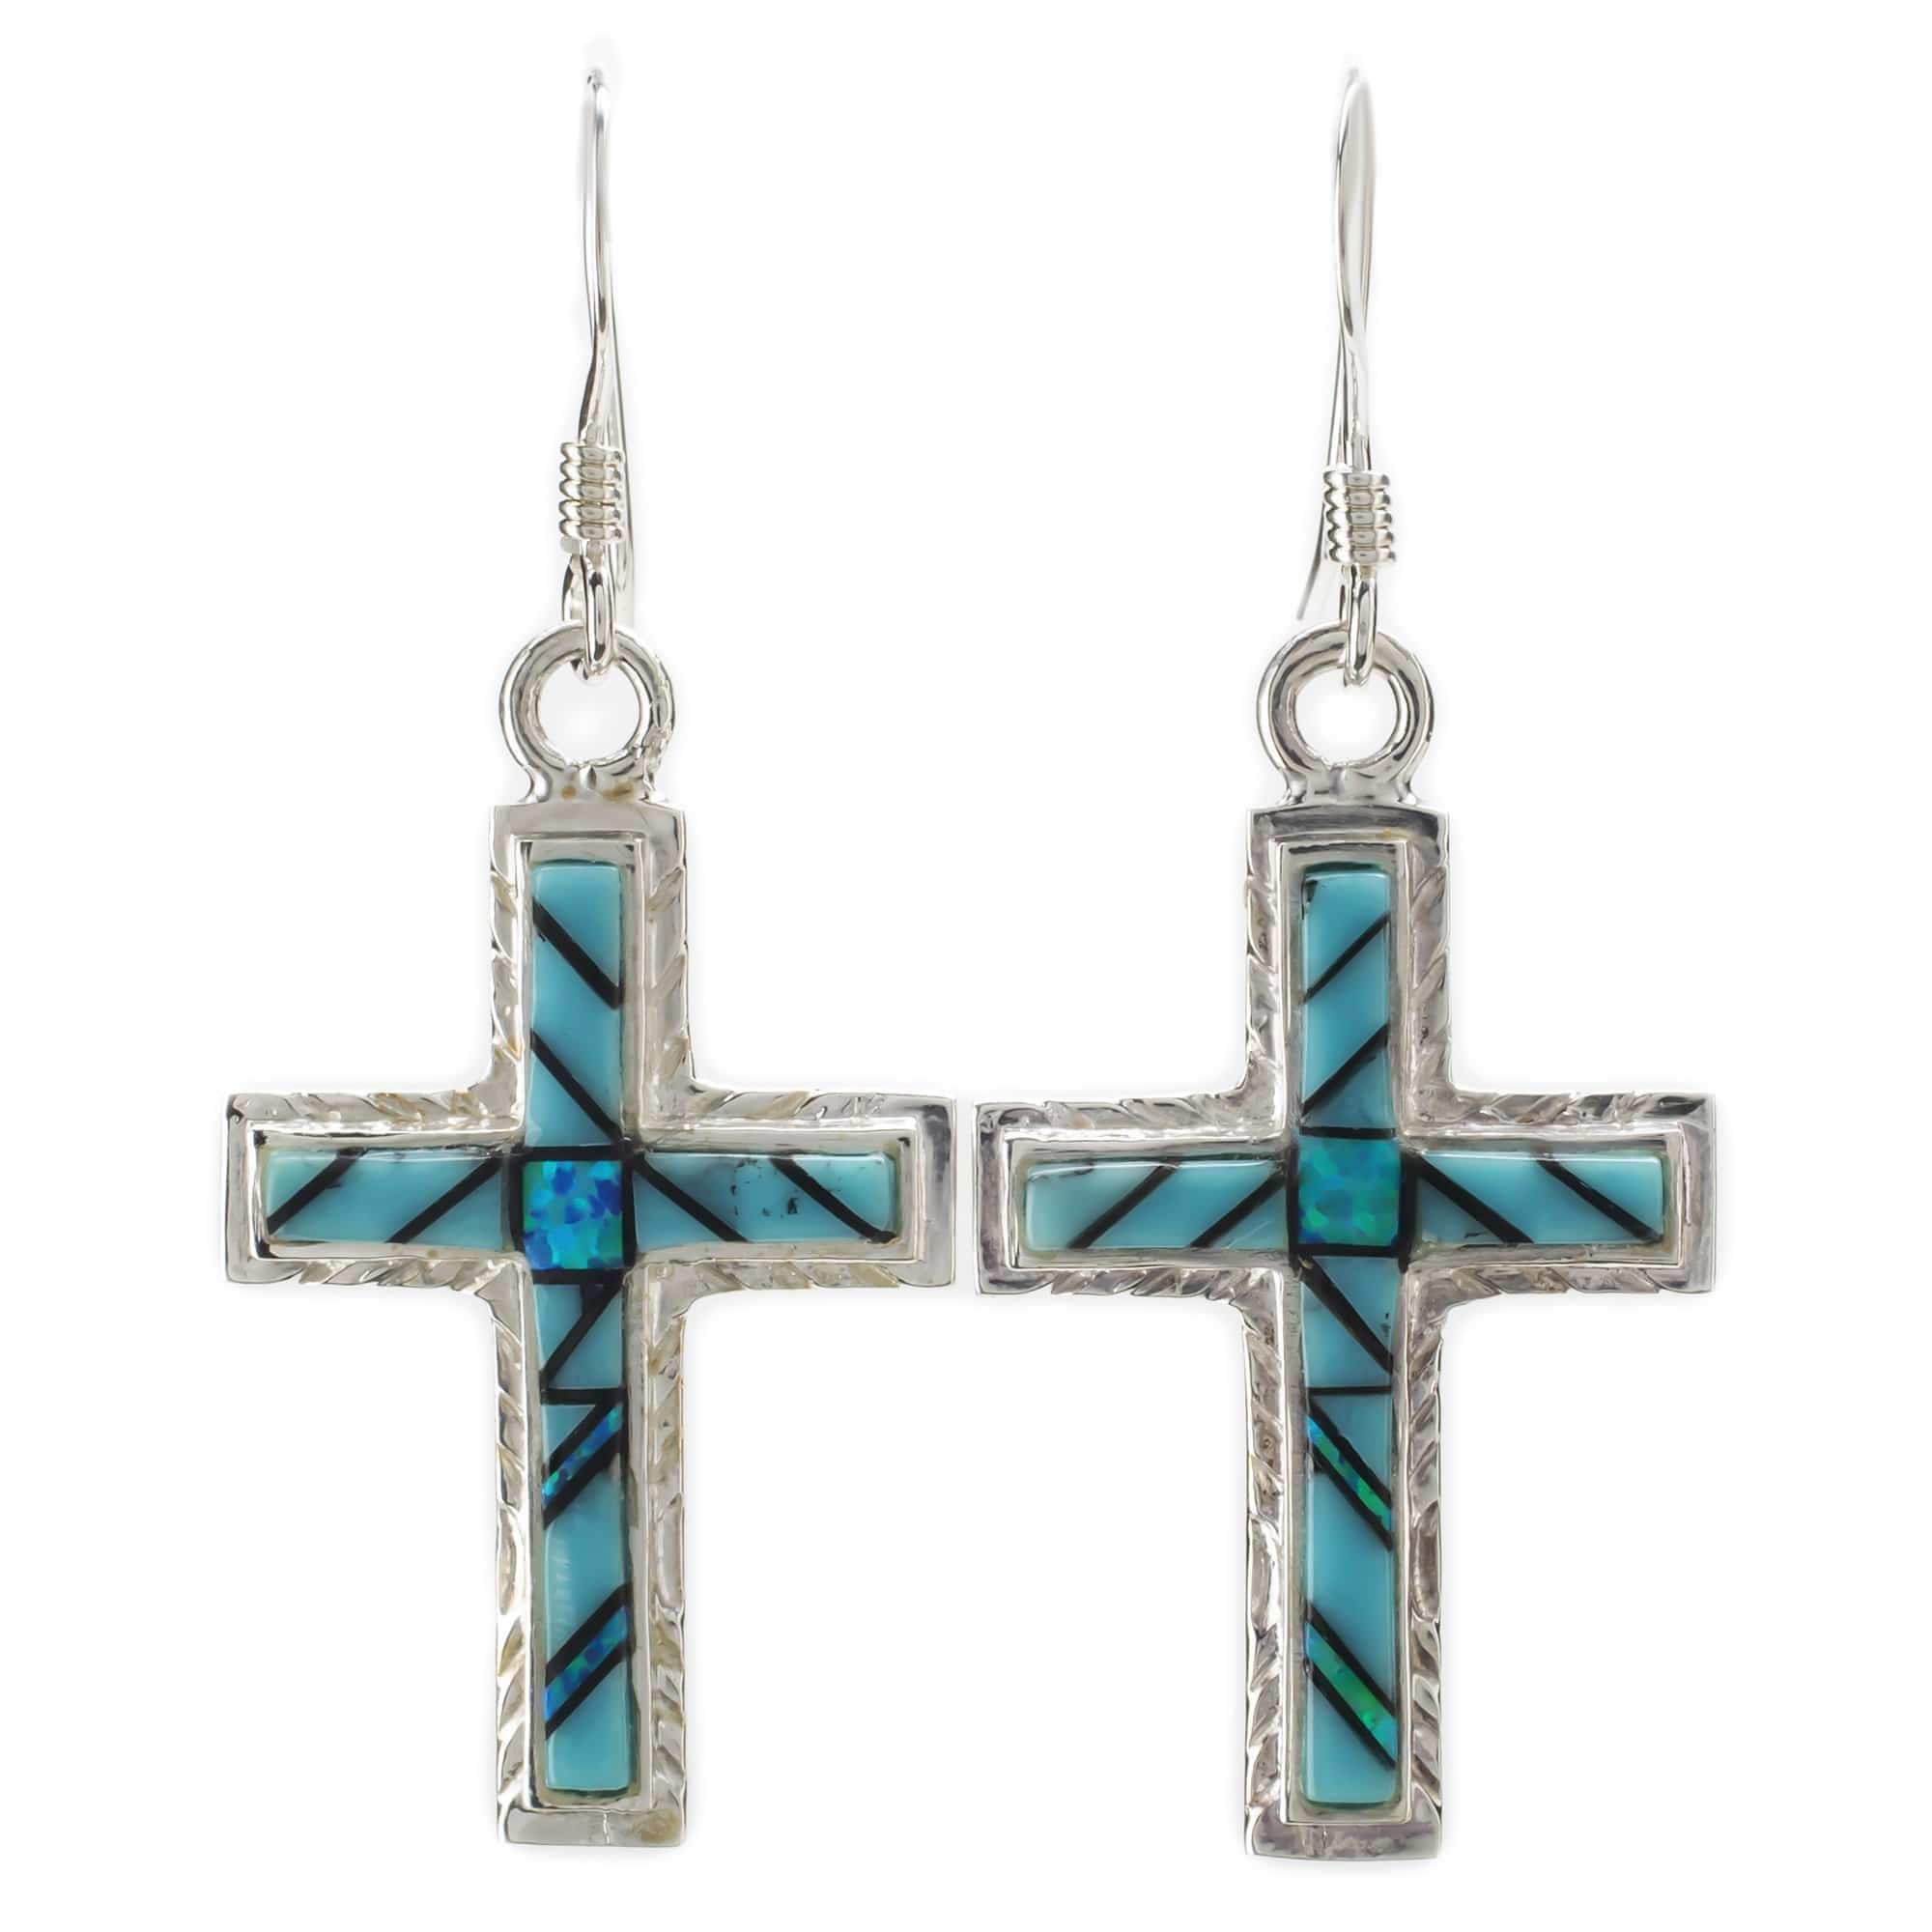 Kalifano Southwest Silver Jewelry Turquoise Cross 925 Sterling Silver Earring with French Hook USA Handmade with Aqua Opal Accent NME.2054.TQ